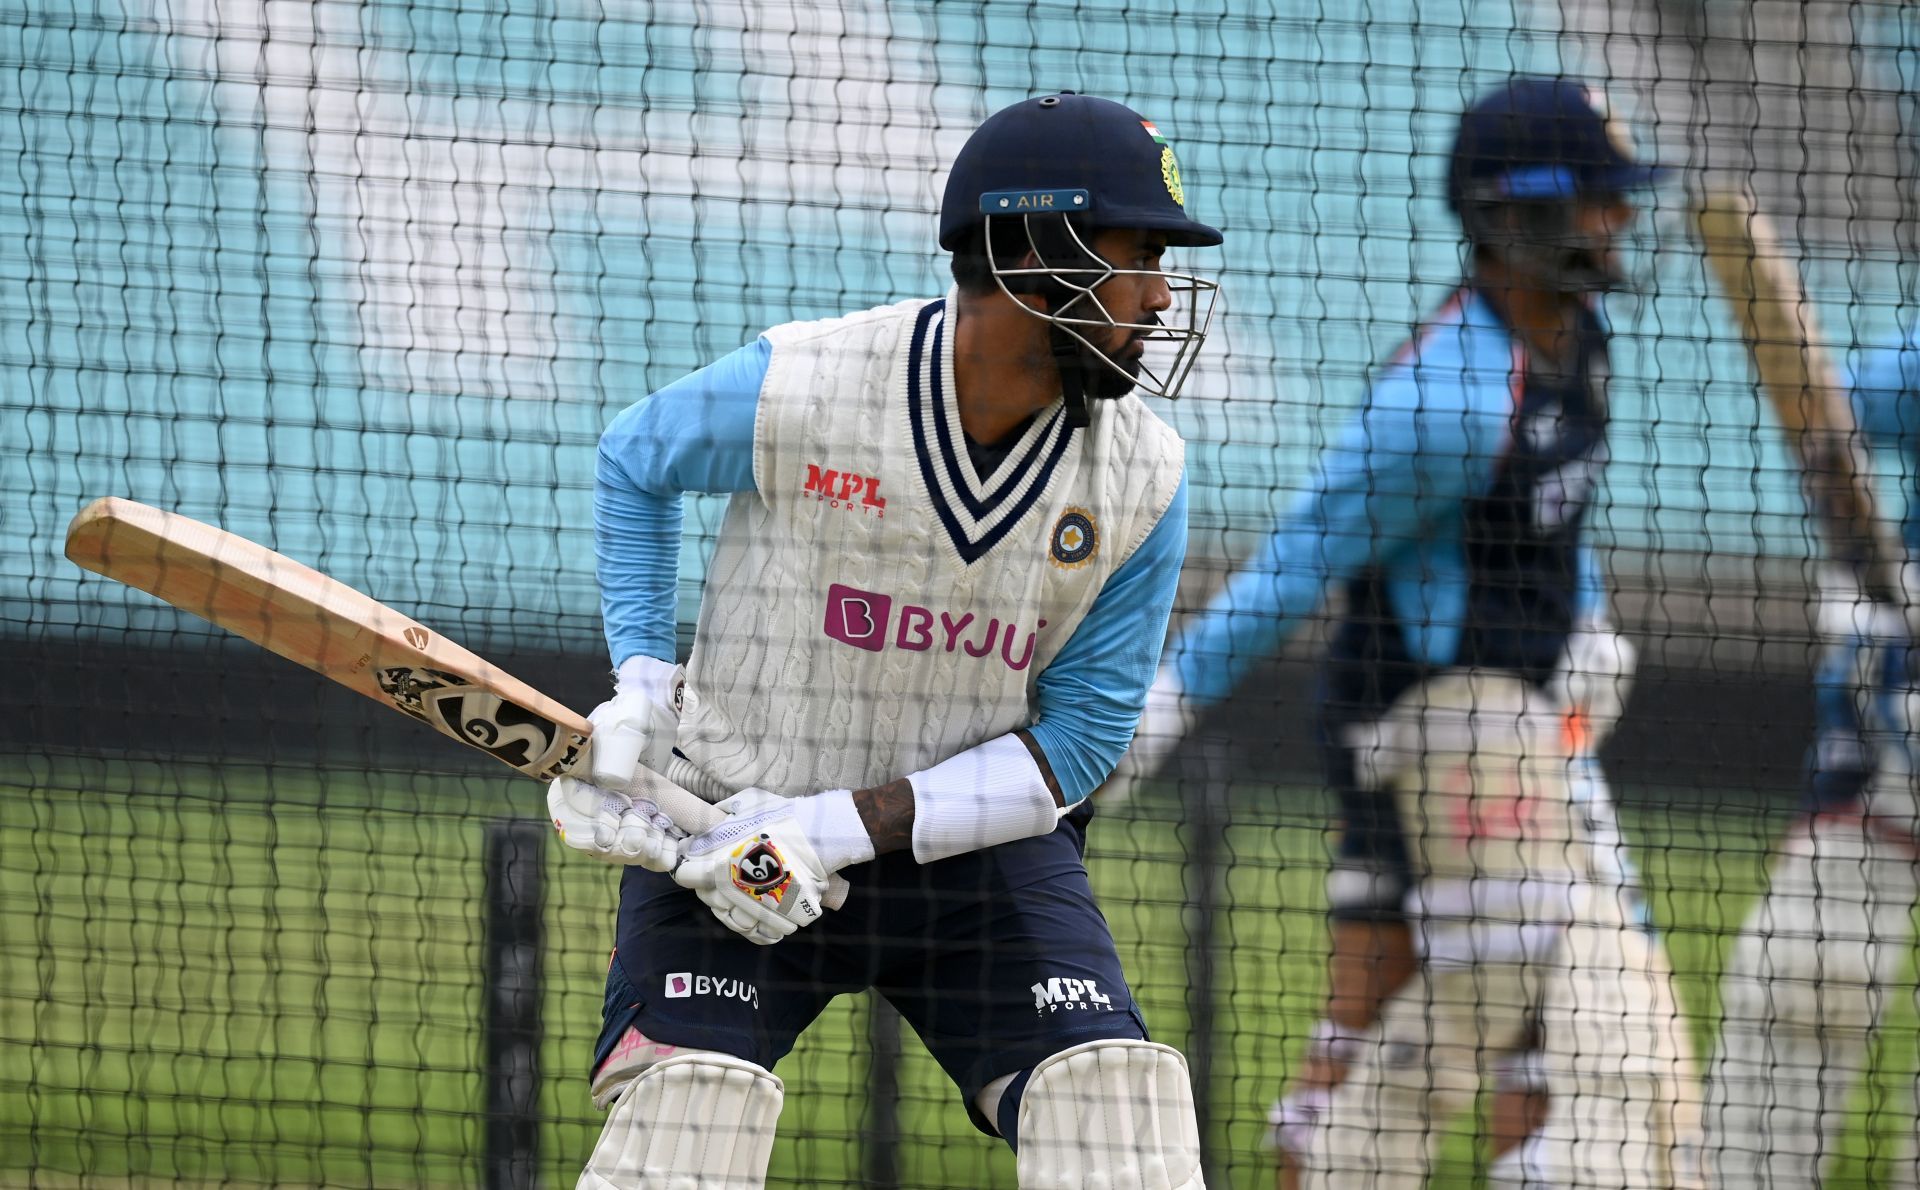 India opener KL Rahul will have a lot on his plate during the ODI series